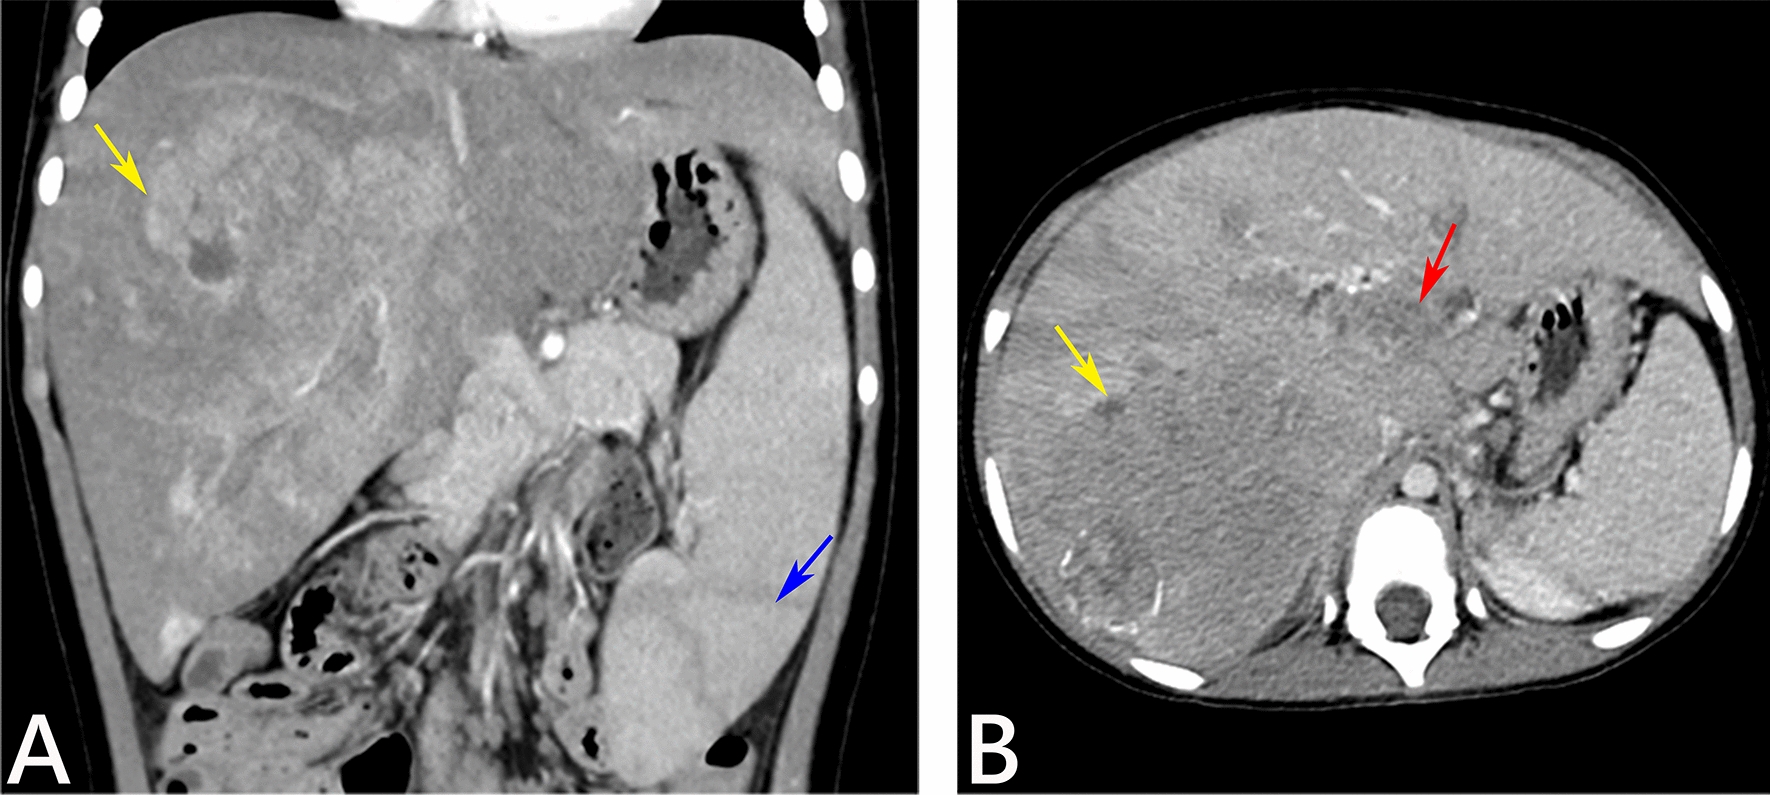 A rare case report: multiple intrahepatic masses in a pediatric patient with citrin deficiency